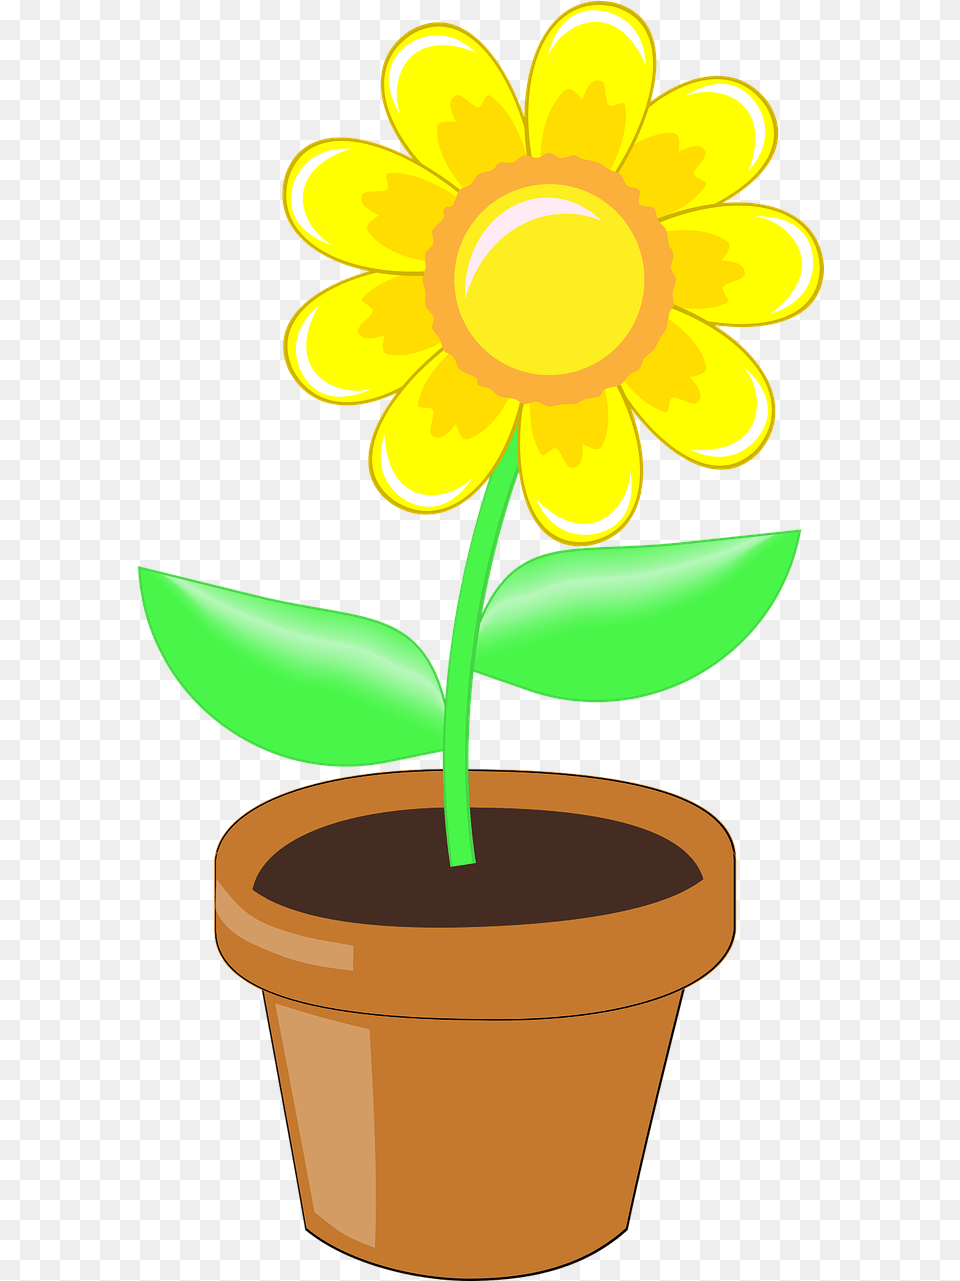 Flower Yellow Nature Free Vector Graphic On Pixabay Gambar Pot Dan Bunga, Daisy, Plant, Petal, Potted Plant Png Image